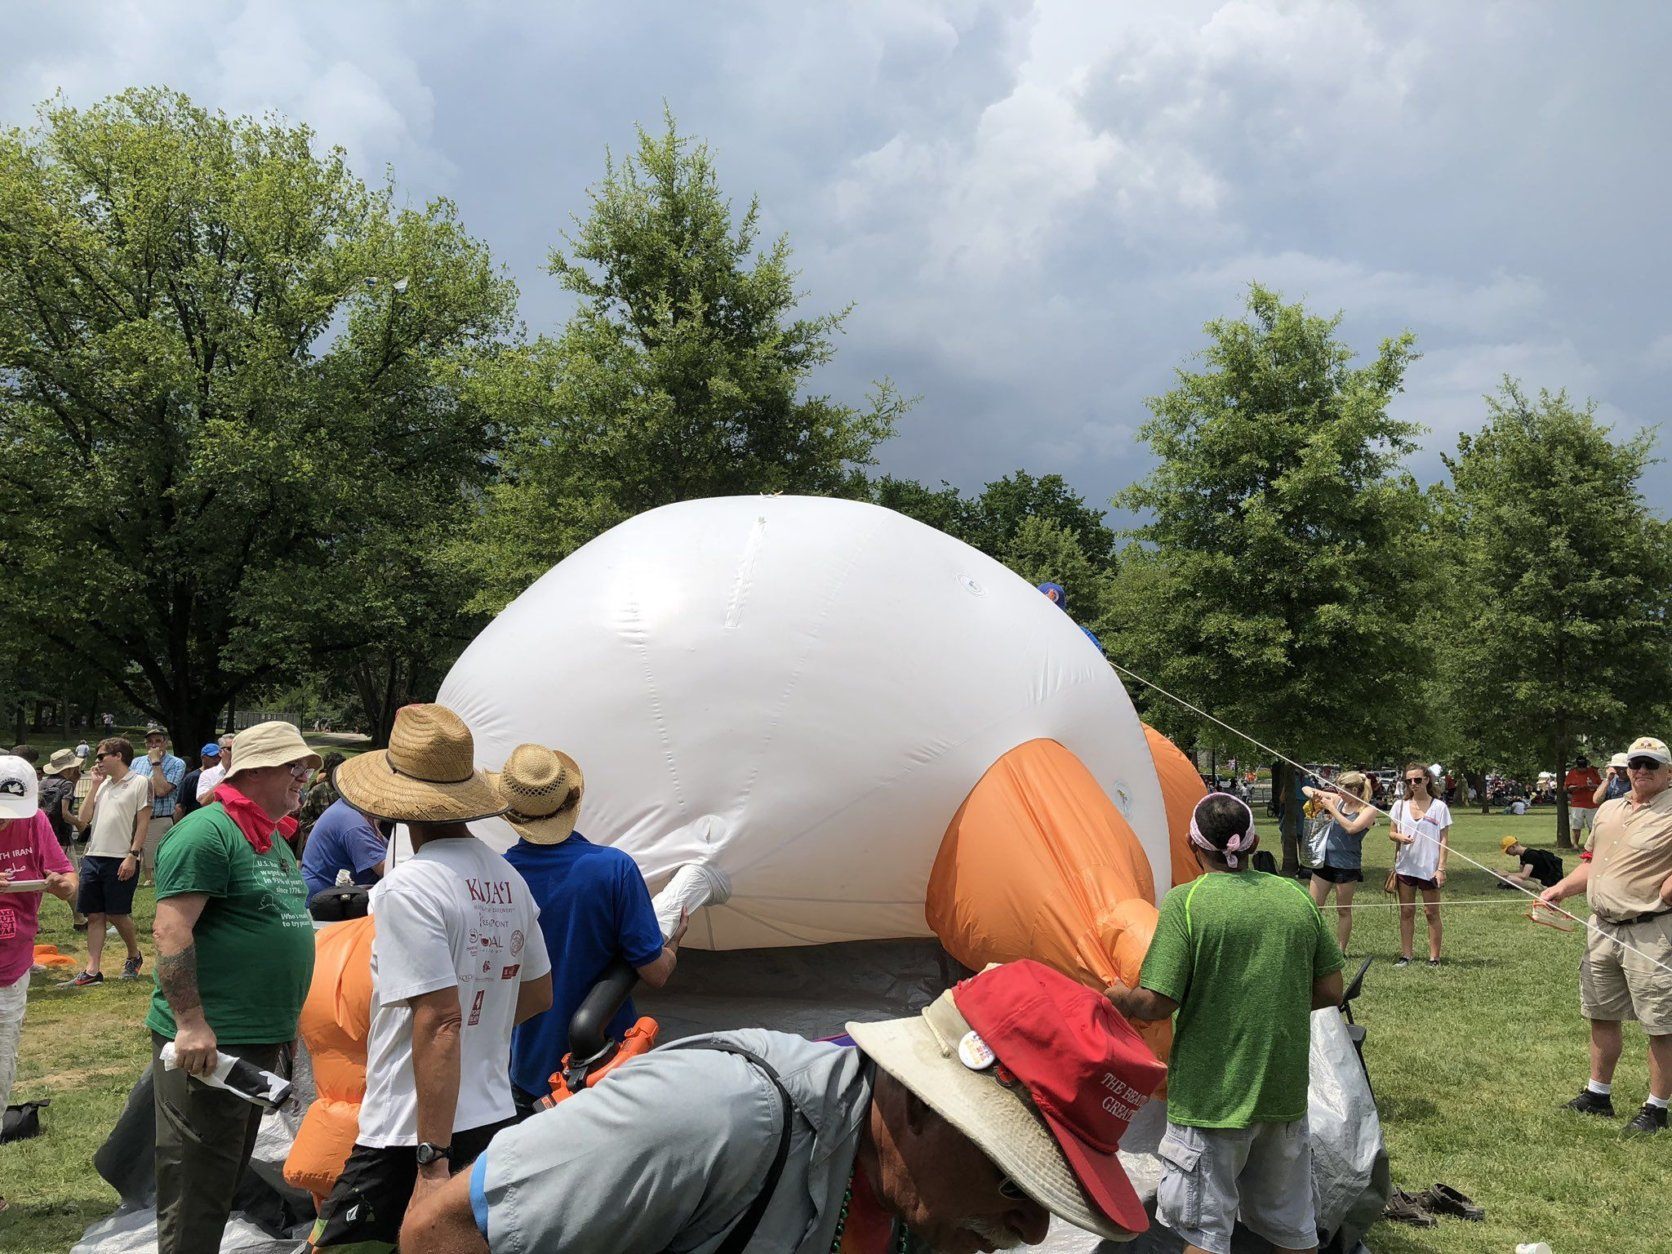 The "Baby Trump" blimp is being deflated ahead of wet weather in Washington on Thursday, July 4, 2019. (WTOP/Mike Murillo)